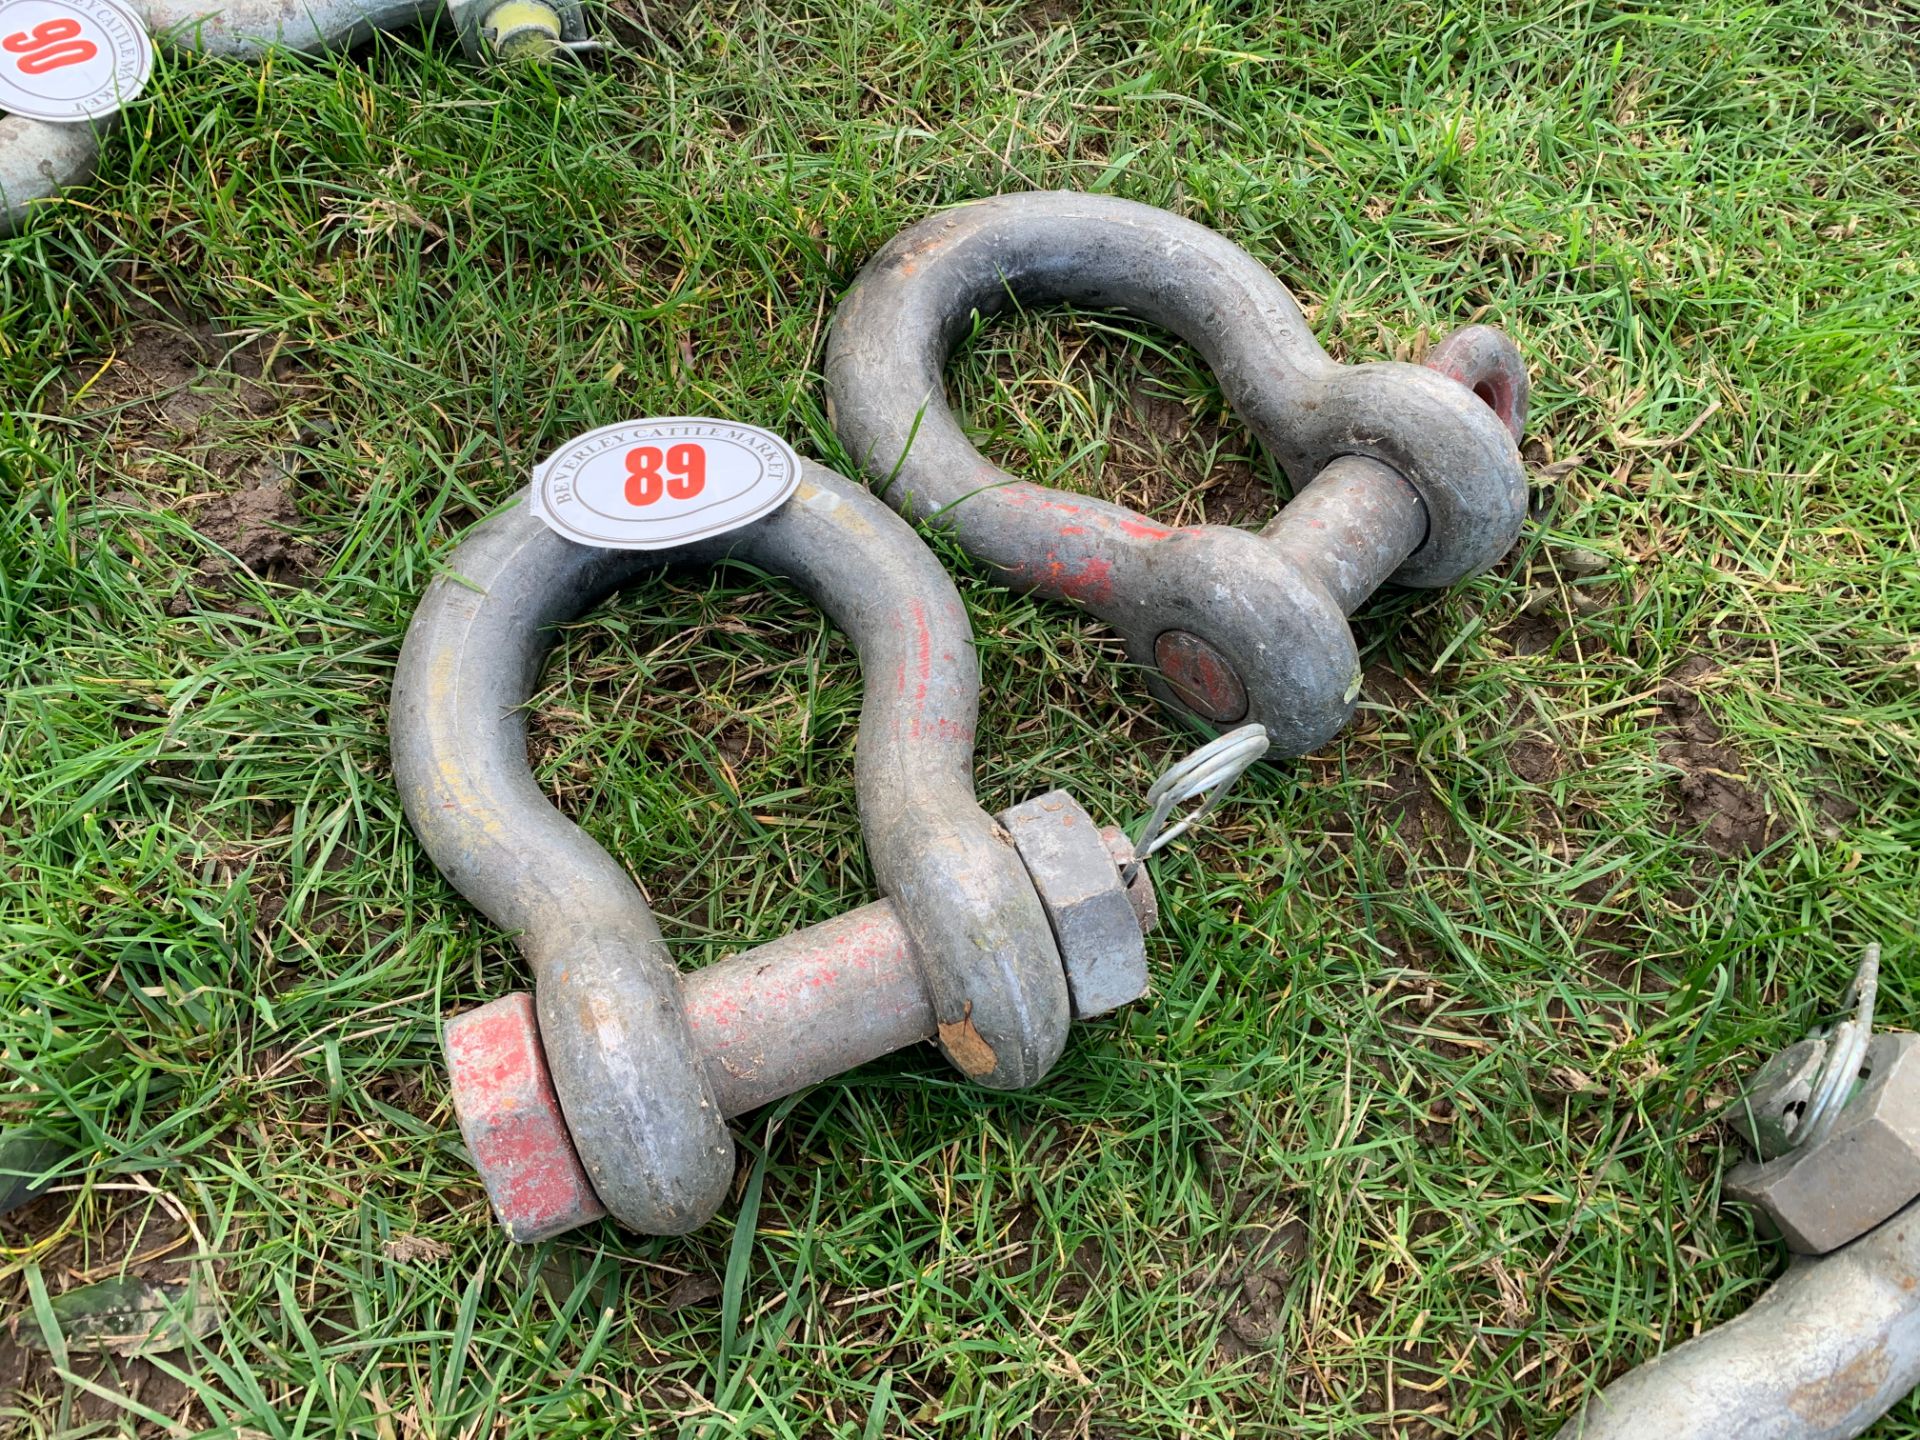 Pair of large shackles